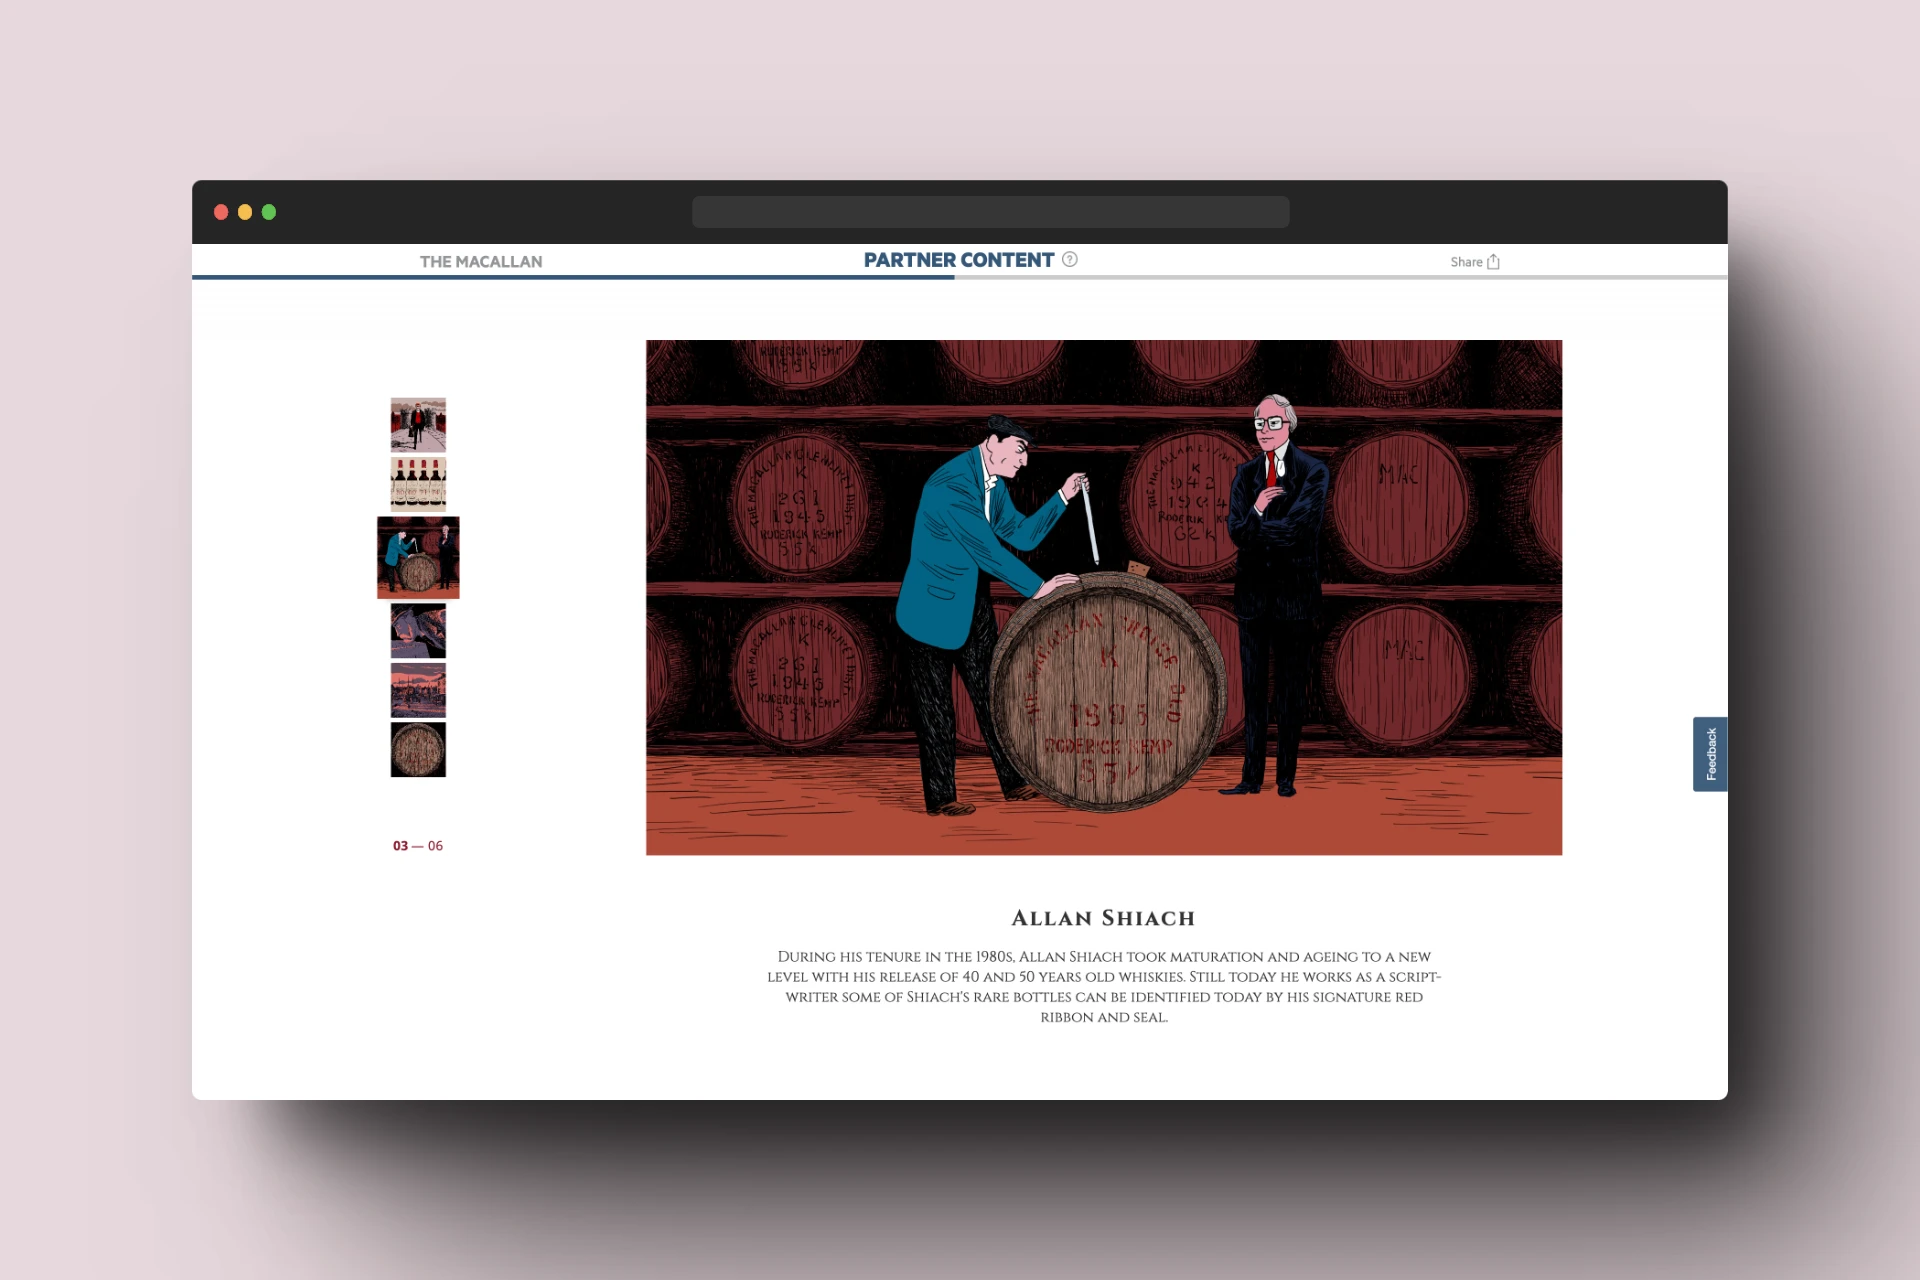 The Macallan's Homepage